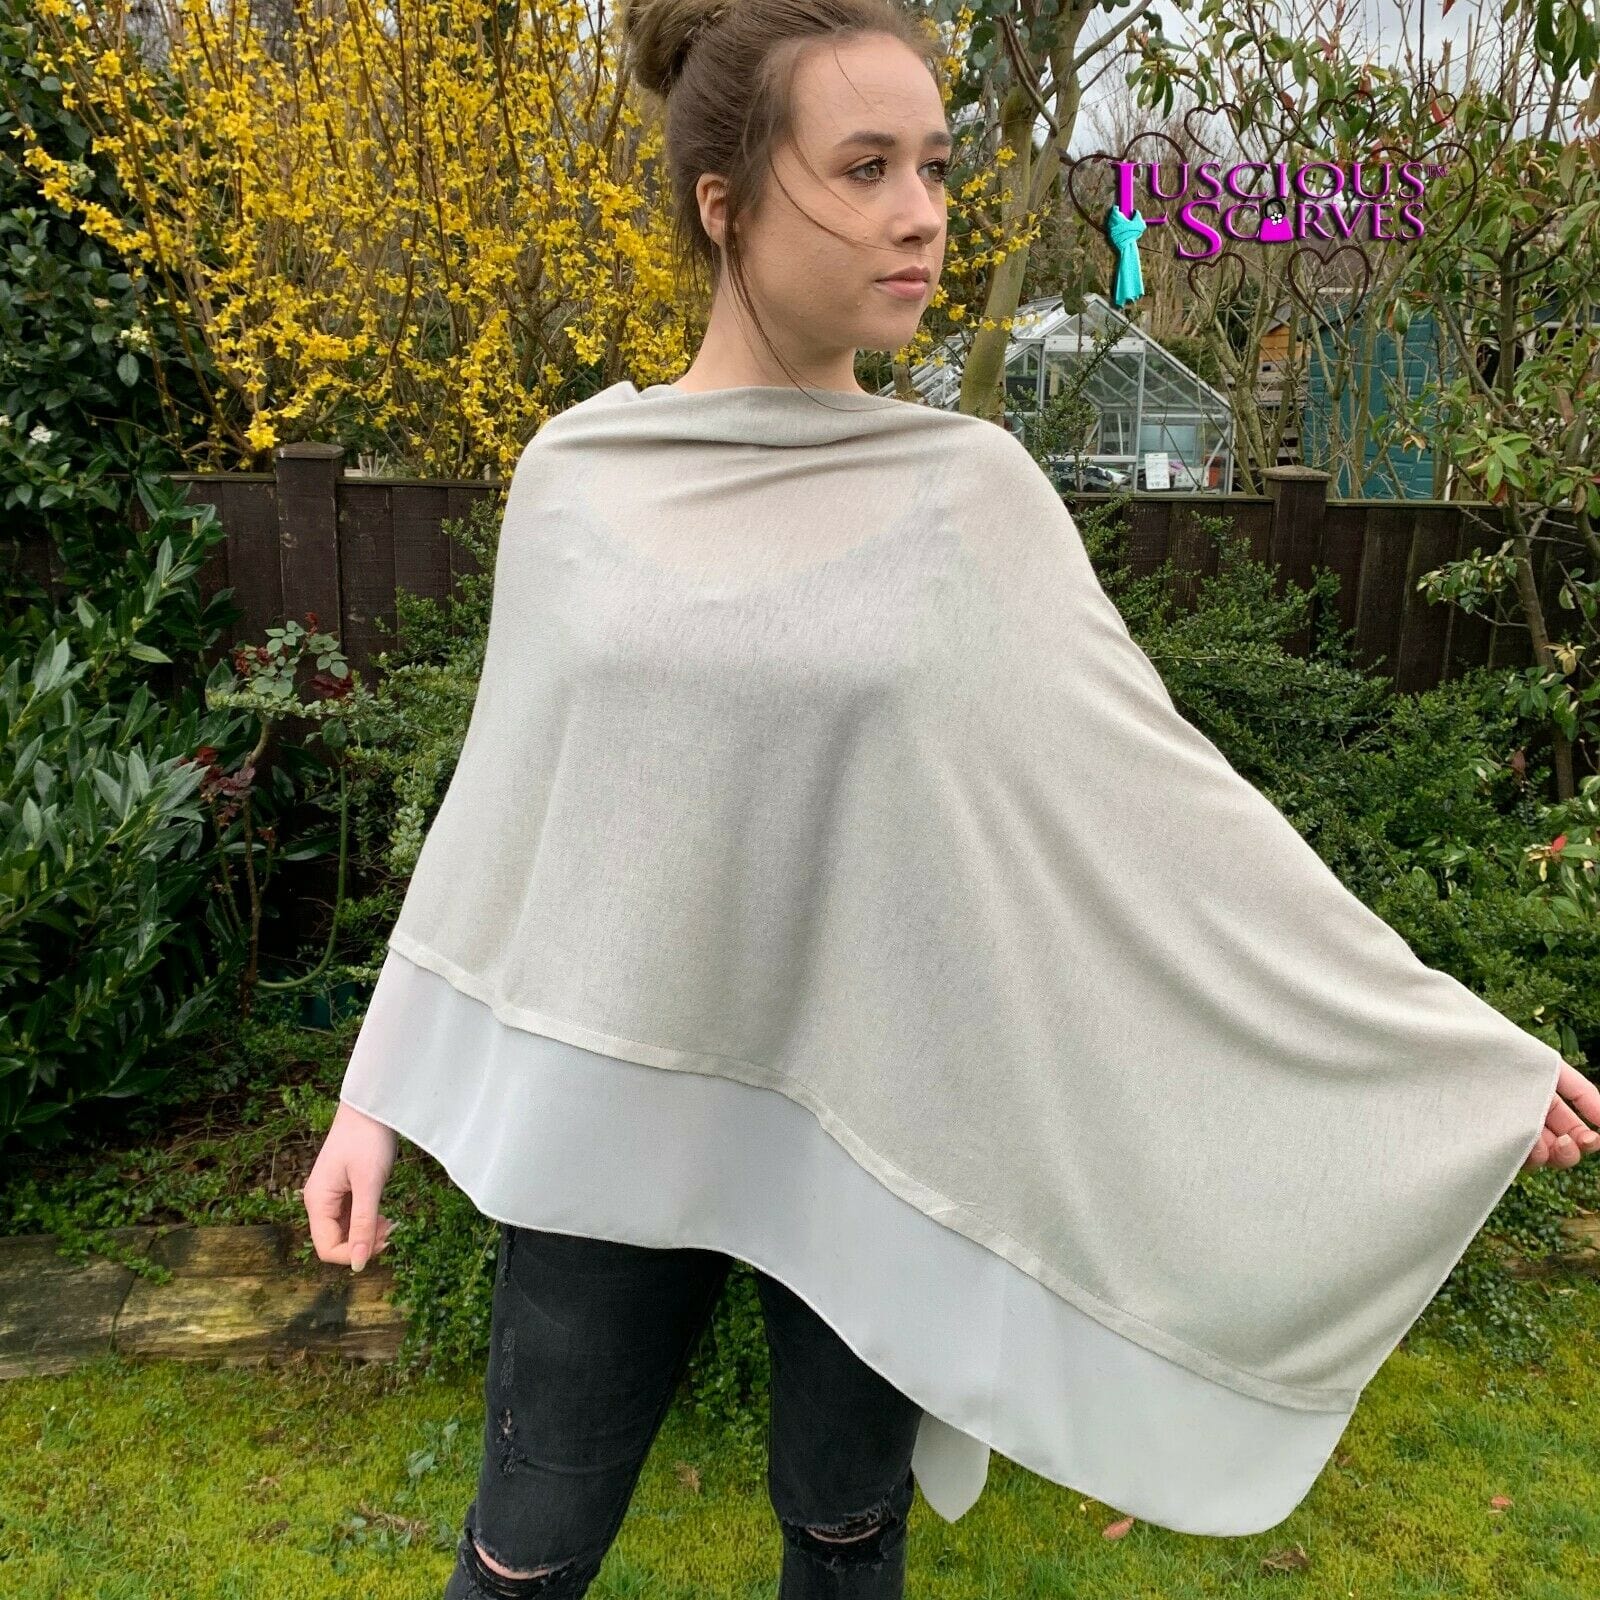 lusciousscarves Poncho Liners Stone Grey Light Weight Poncho